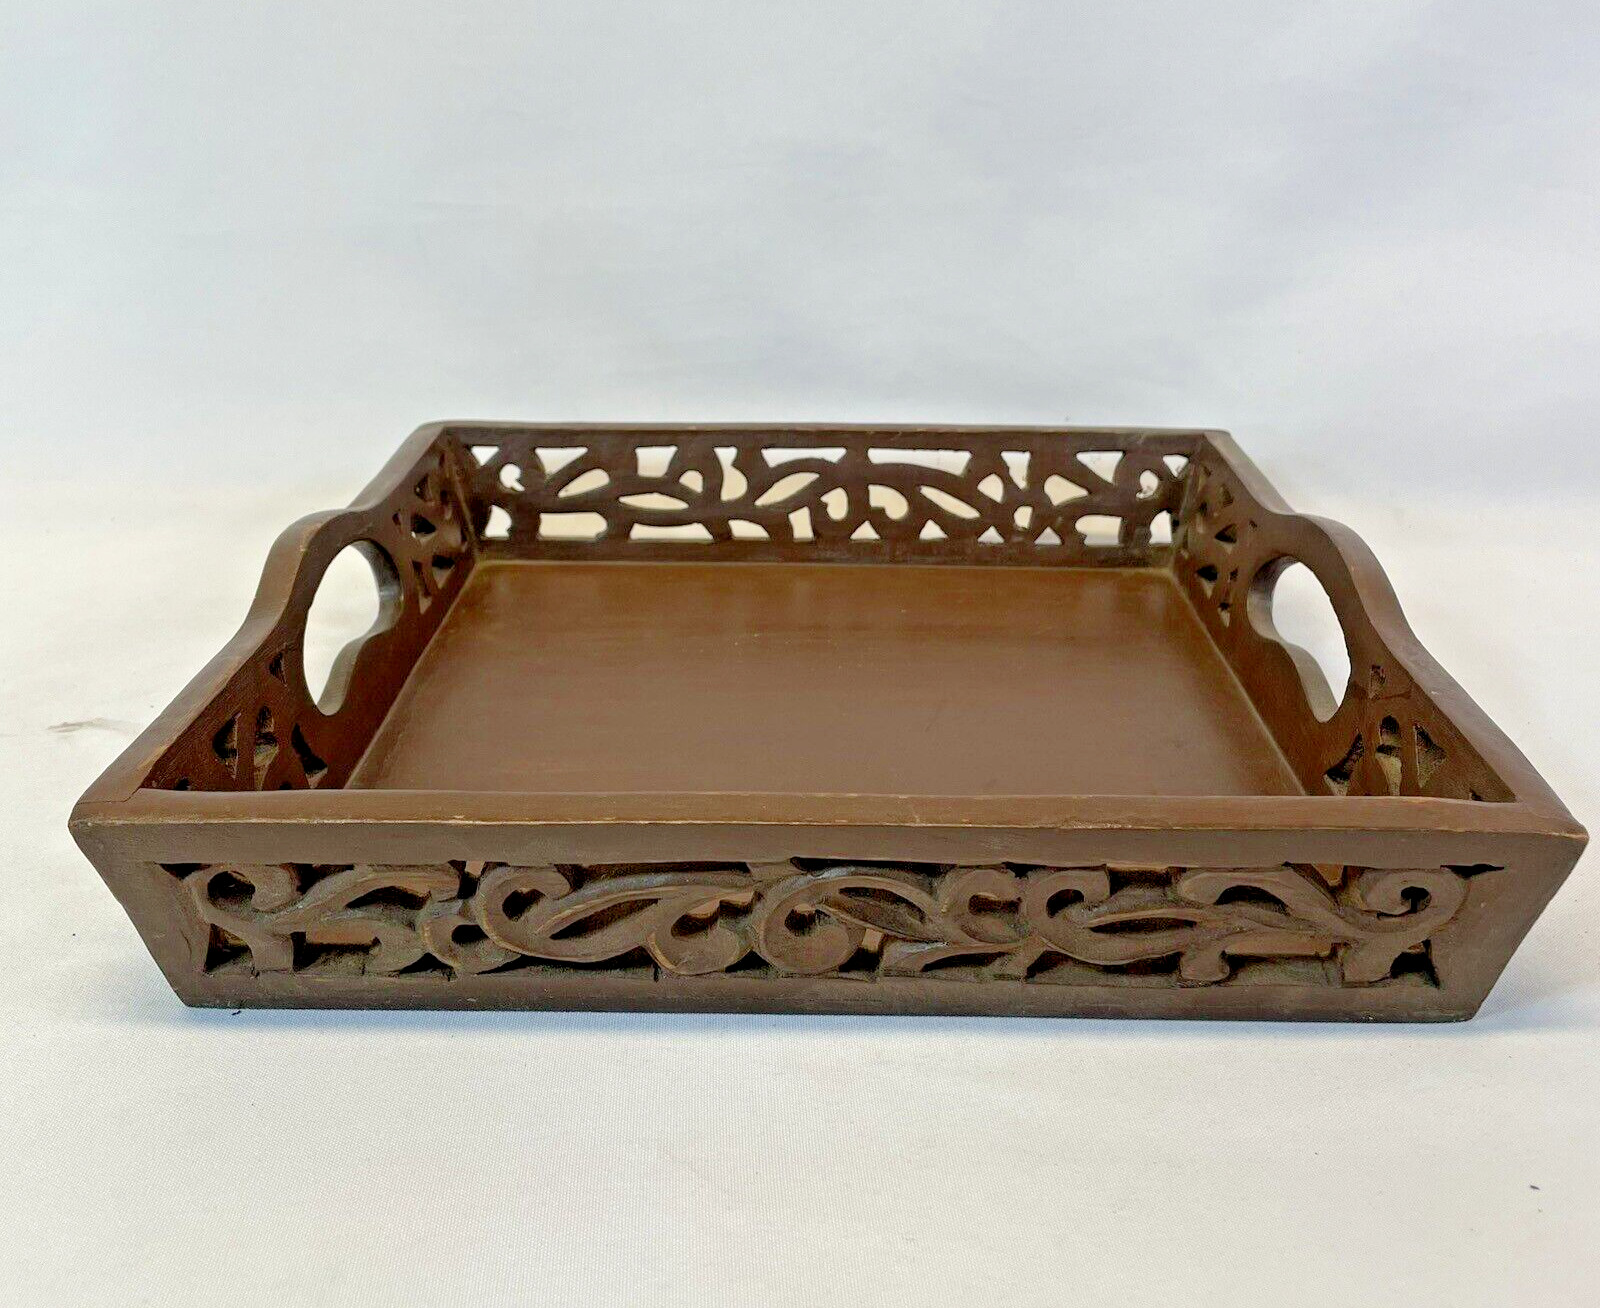 Exquisite World Market 12x12 Hand-Carved Decorative Wooden Serving Tray